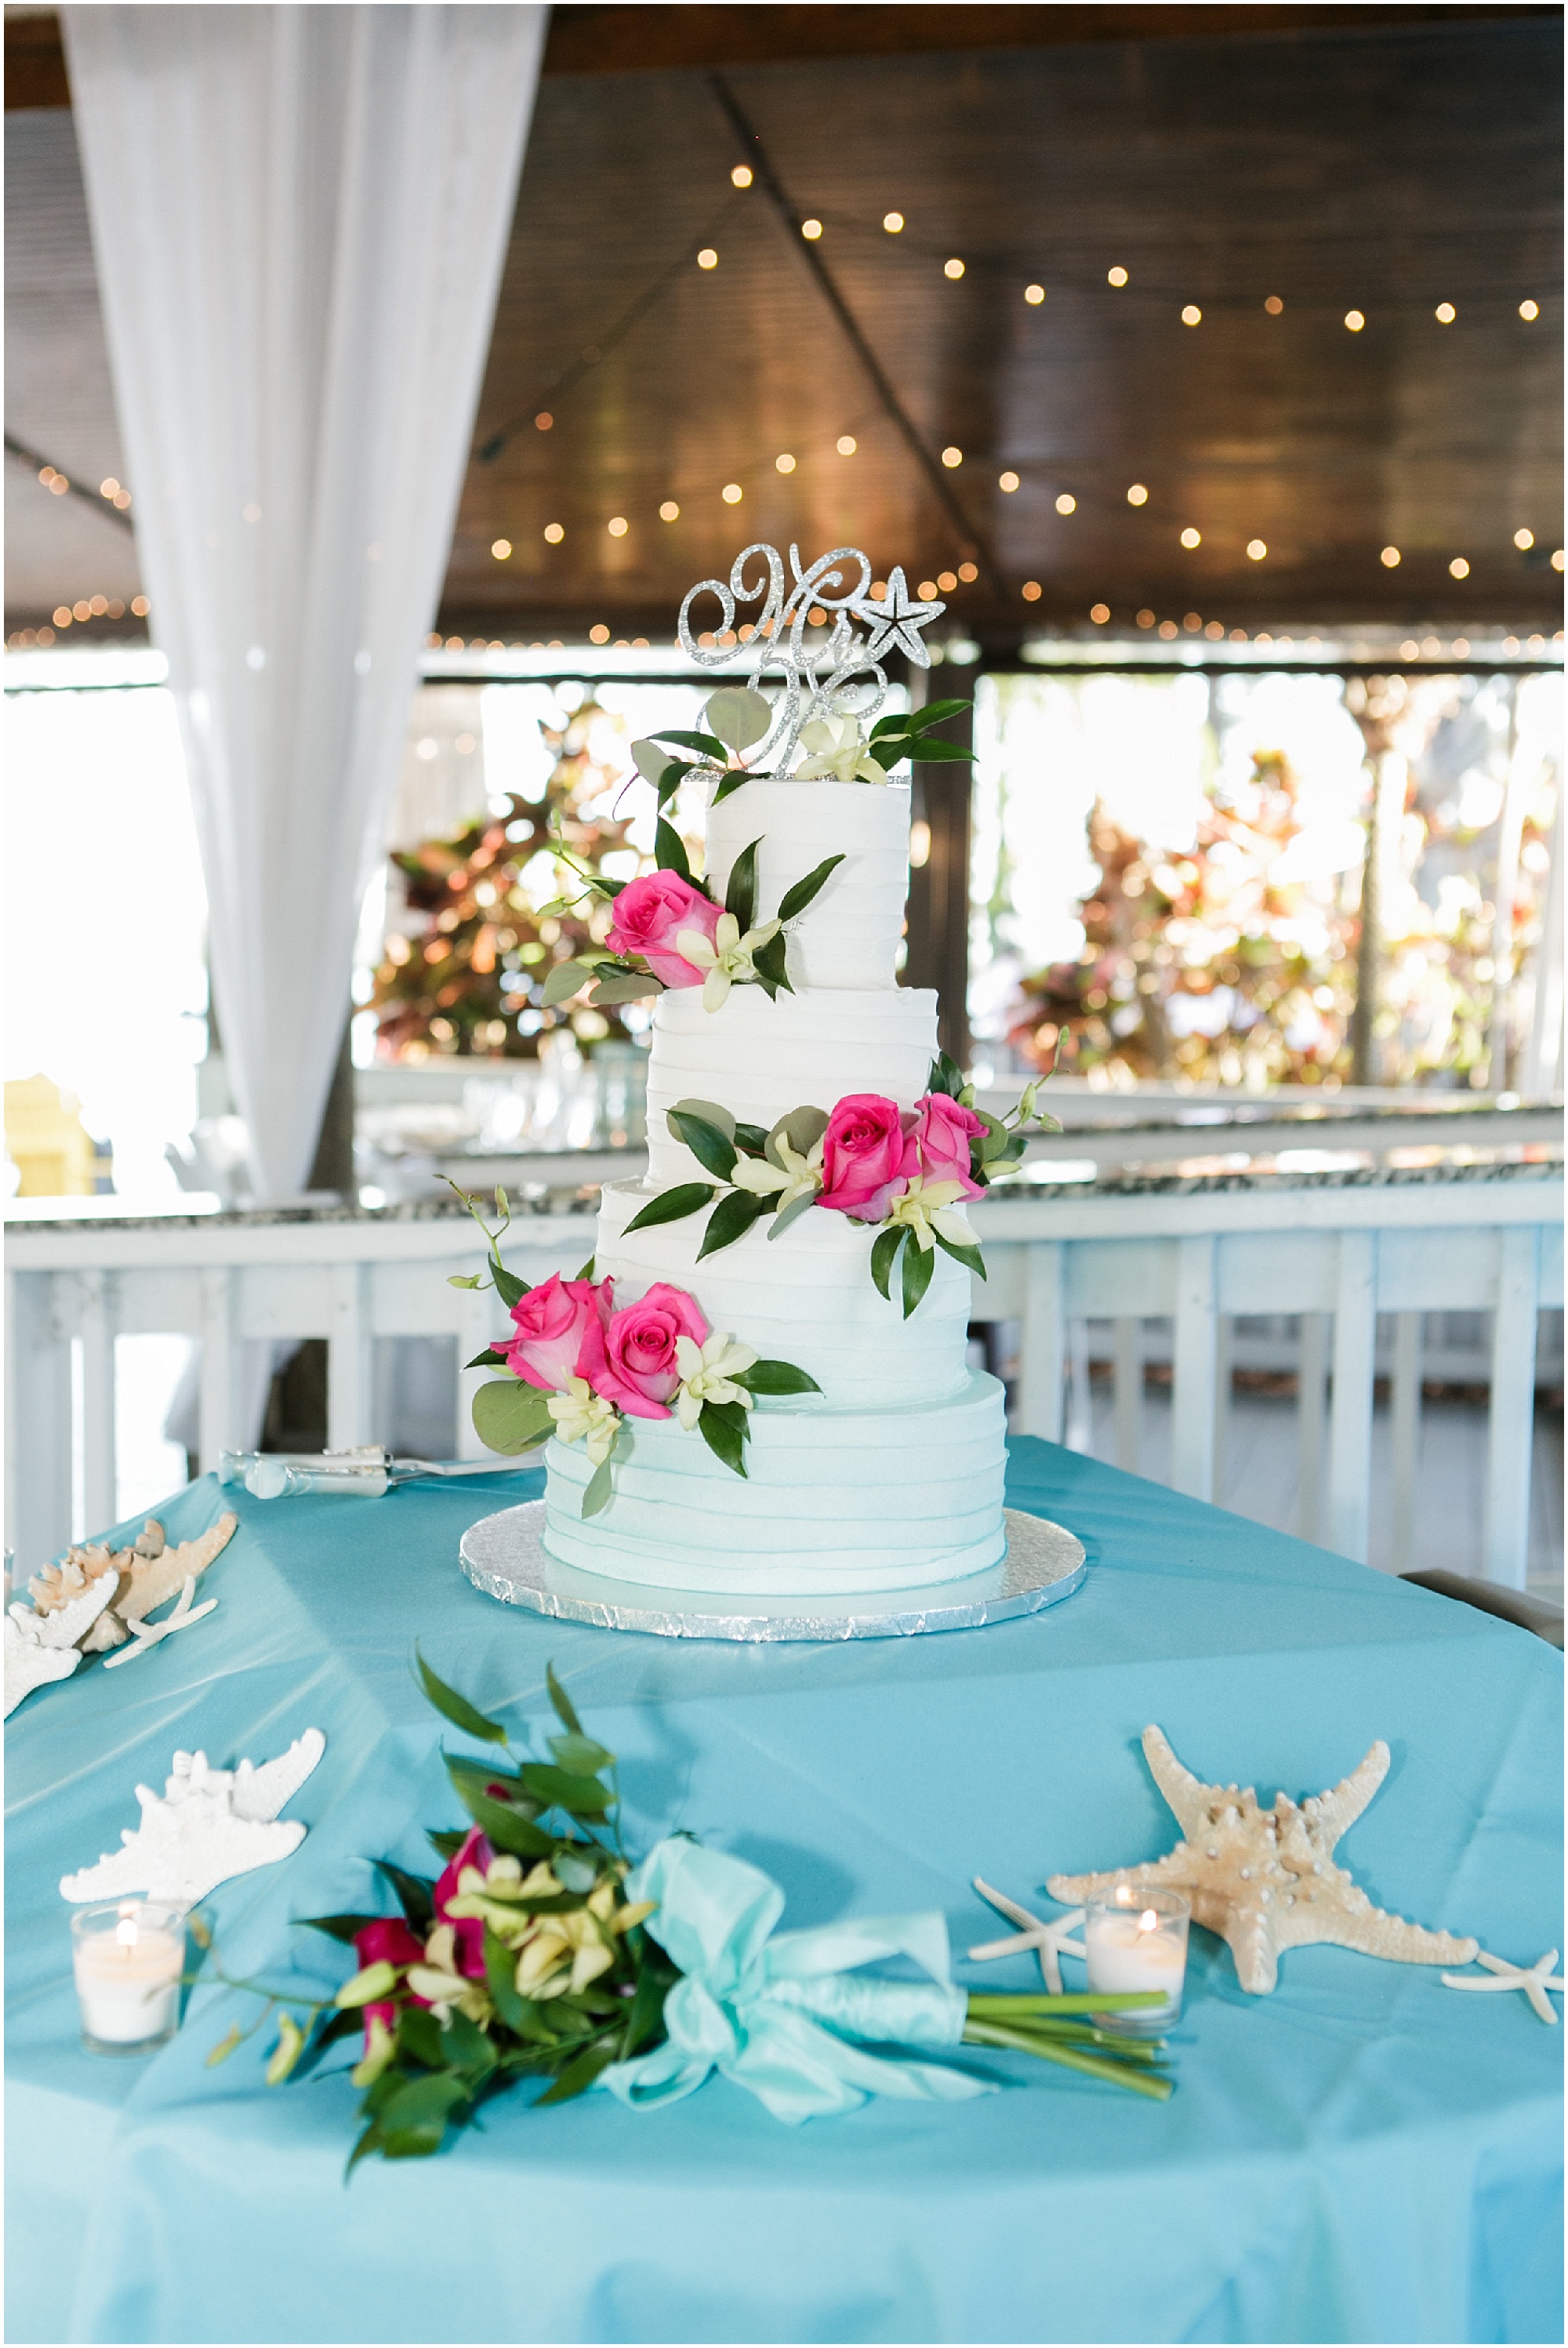 4-tier wedding cake with pink and green floral accents. 